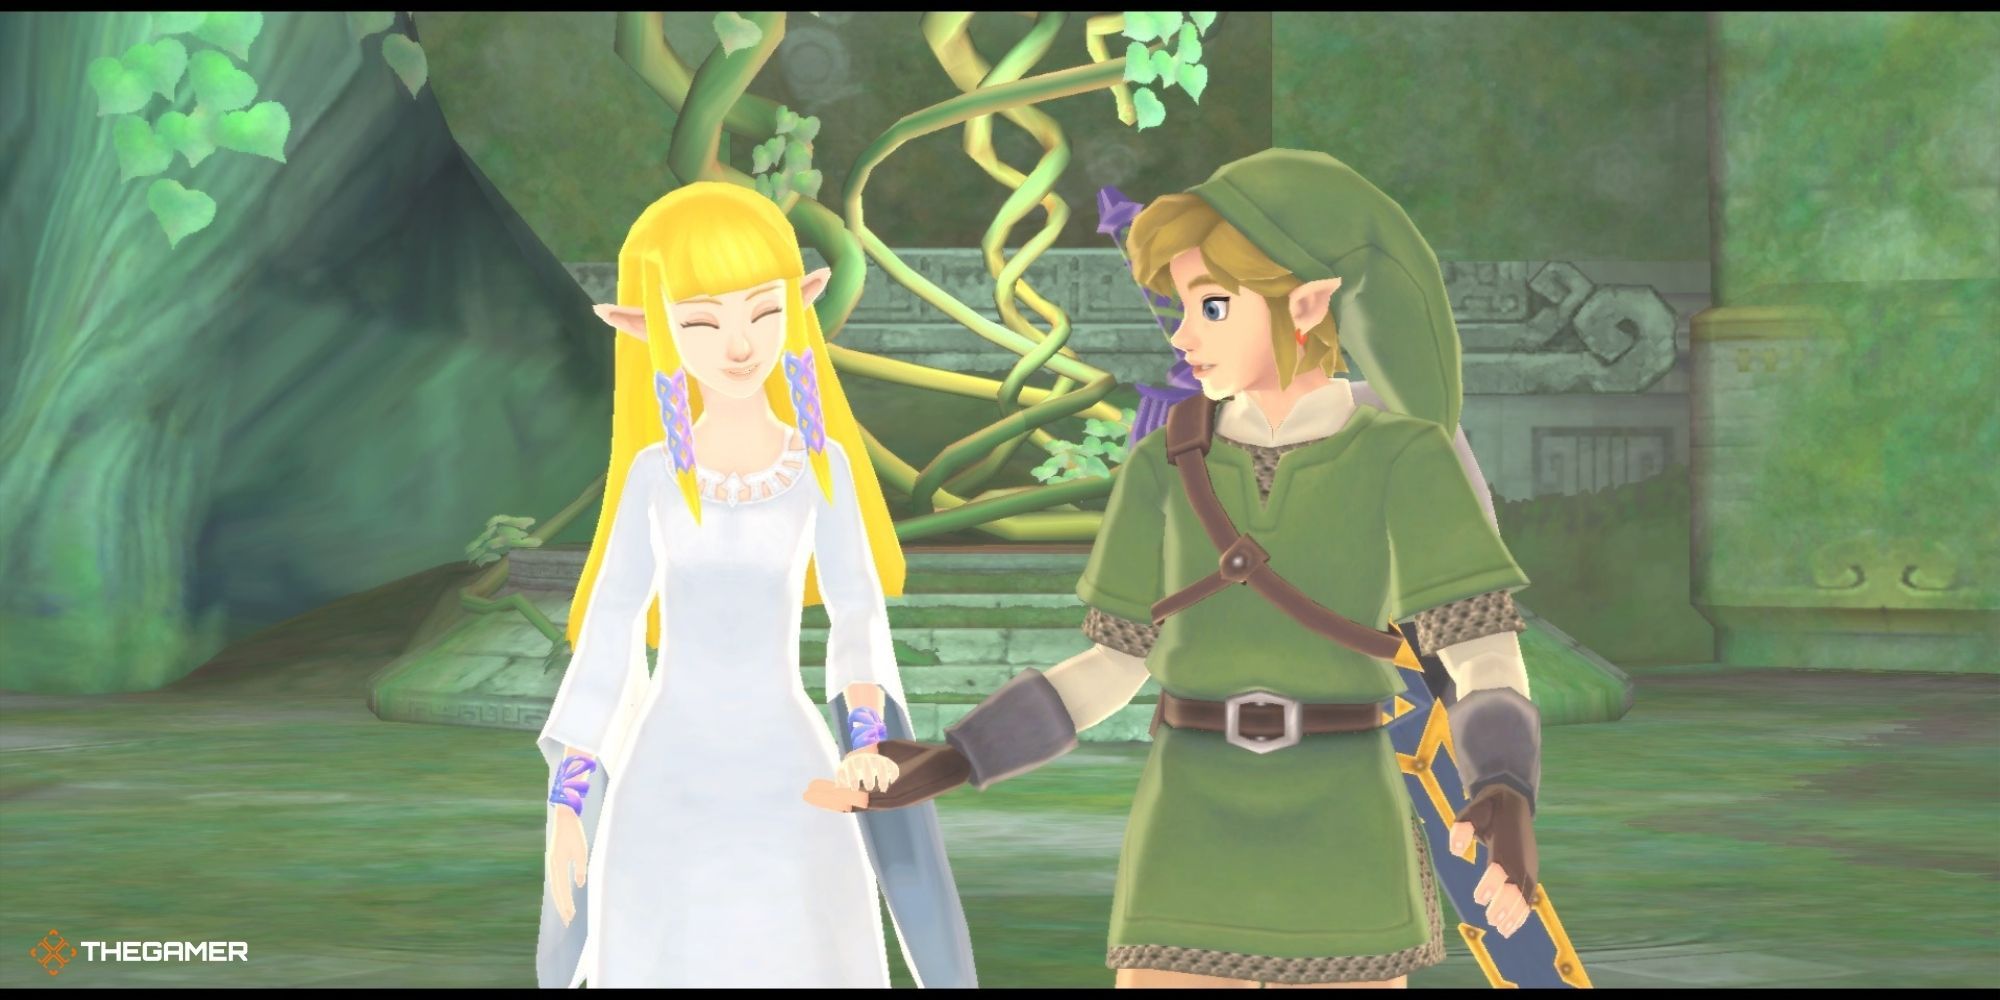 Everything You Need To Know About Link And Zeldas Relationship